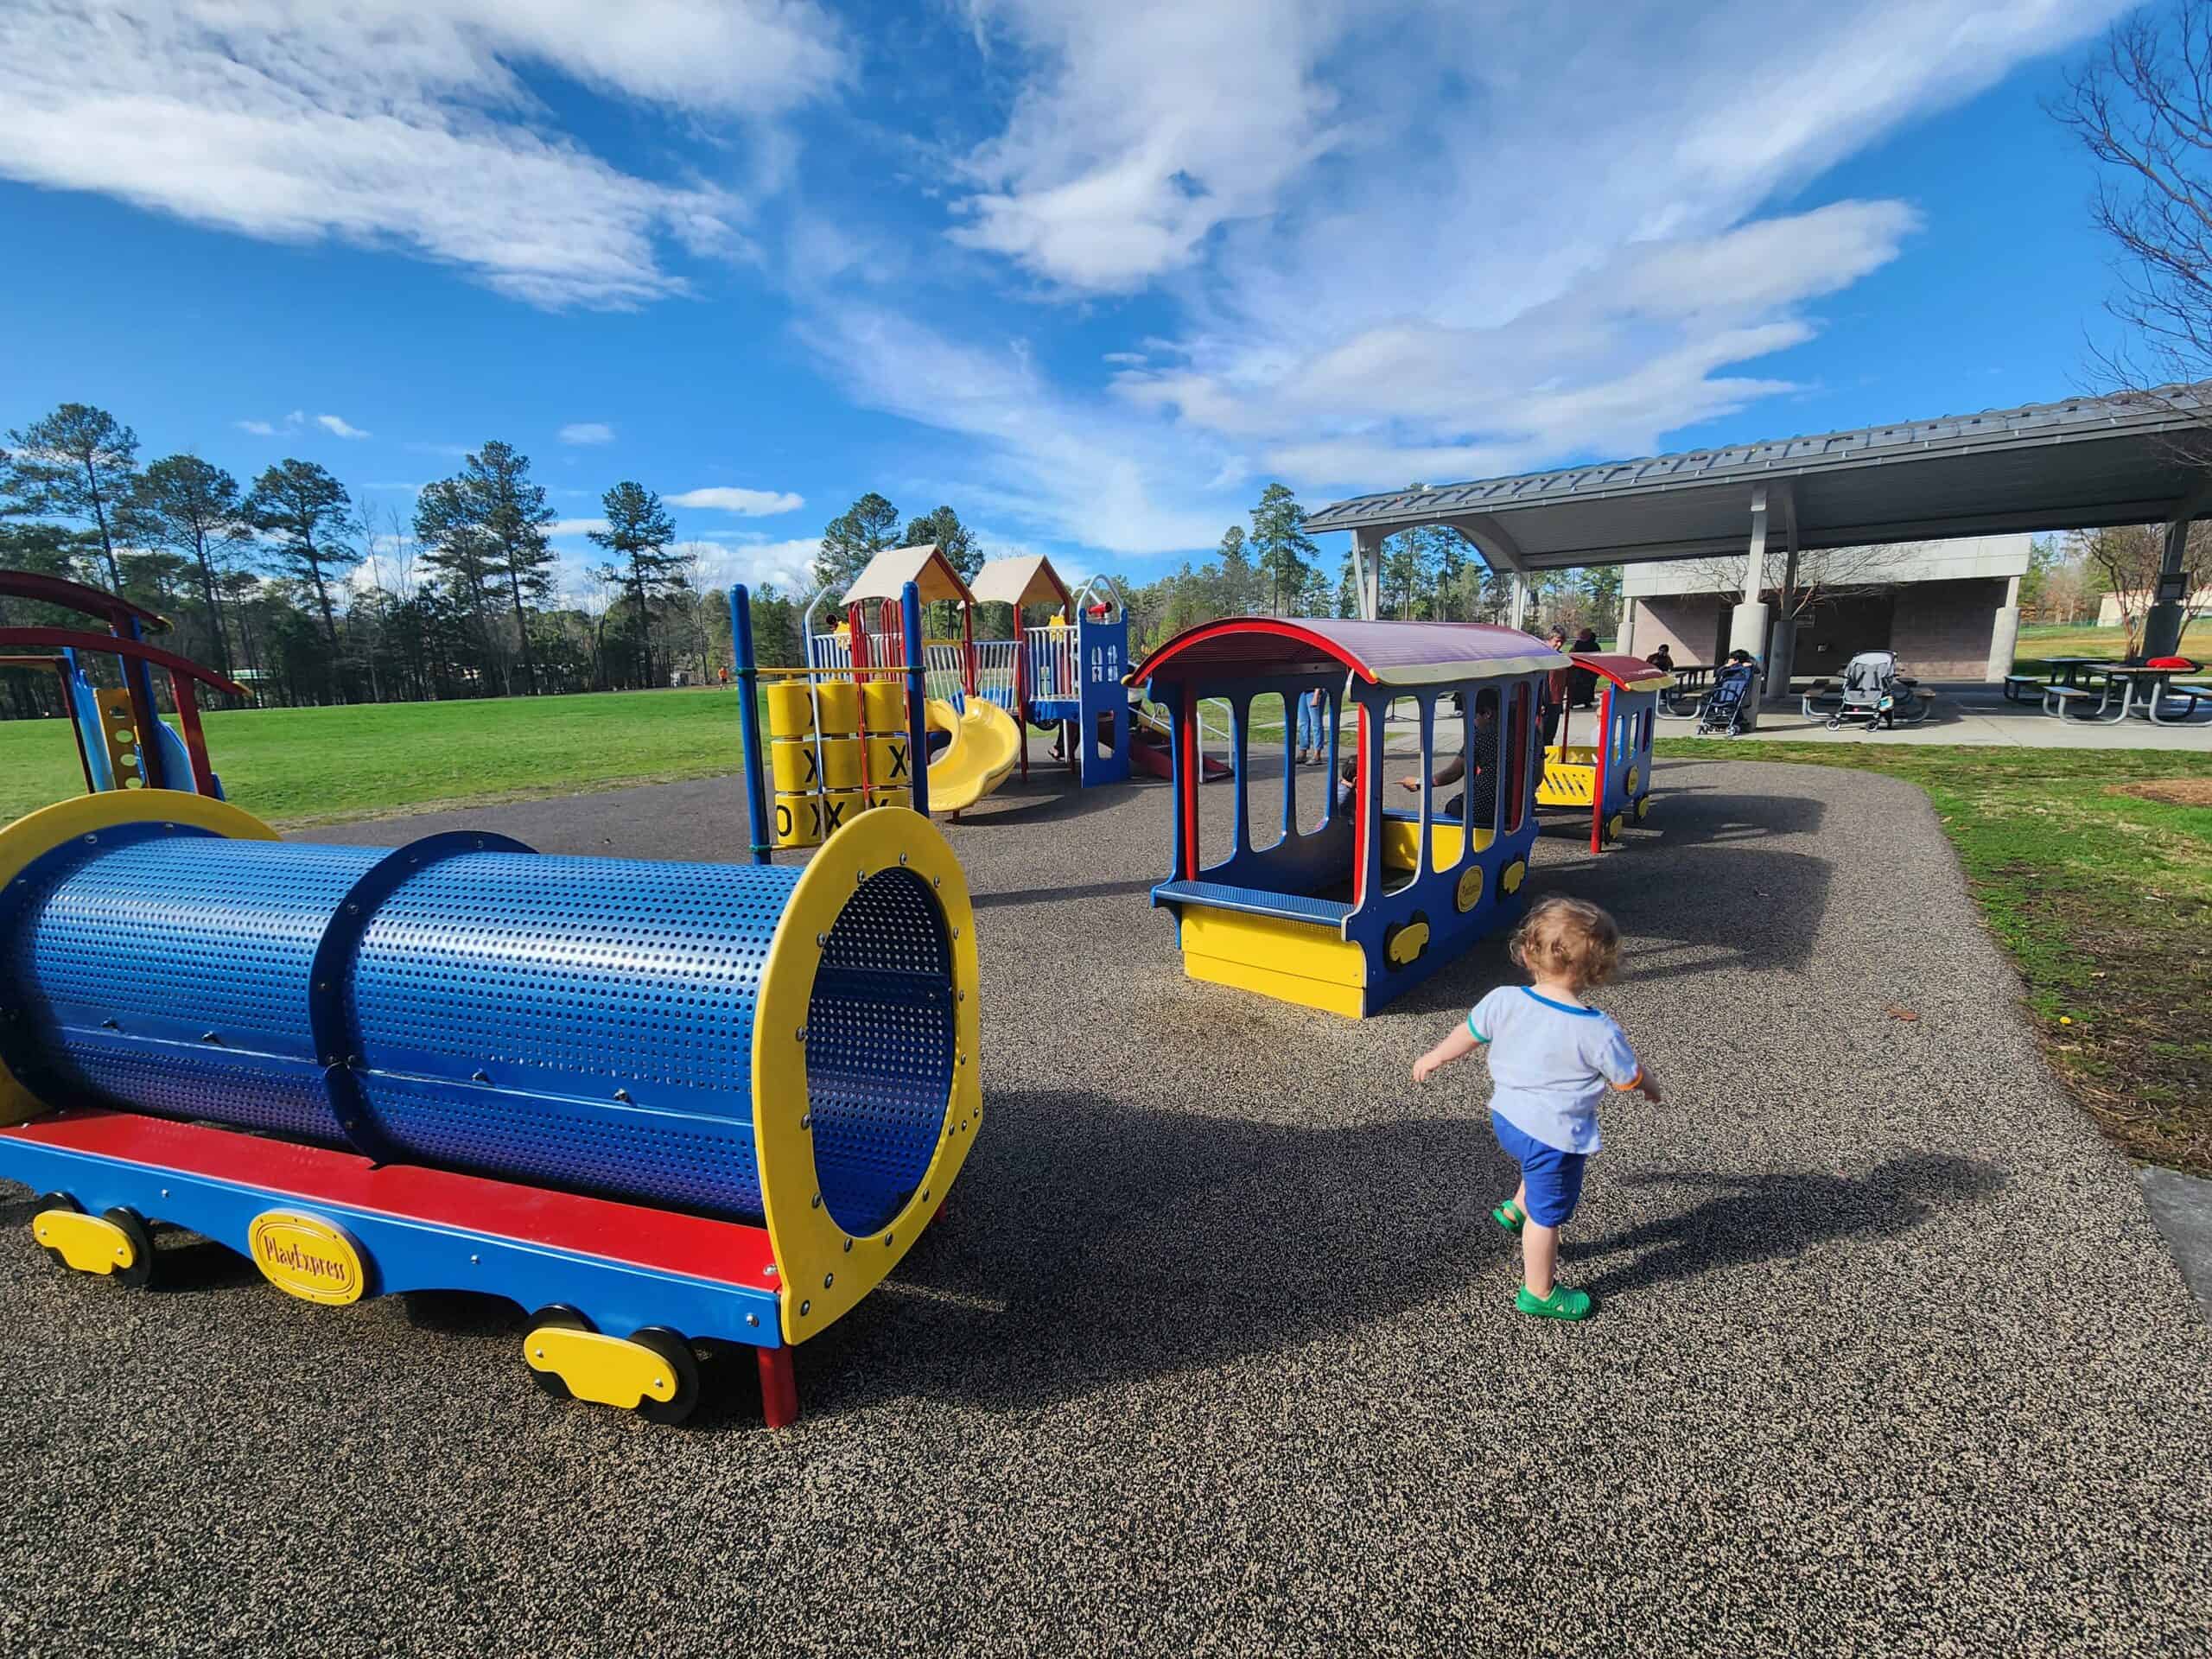 A young child toddles towards colorful playground equipment on a sunny day, with a vibrant blue tunnel and a yellow and red play train set against a background of green grass and a clear sky.